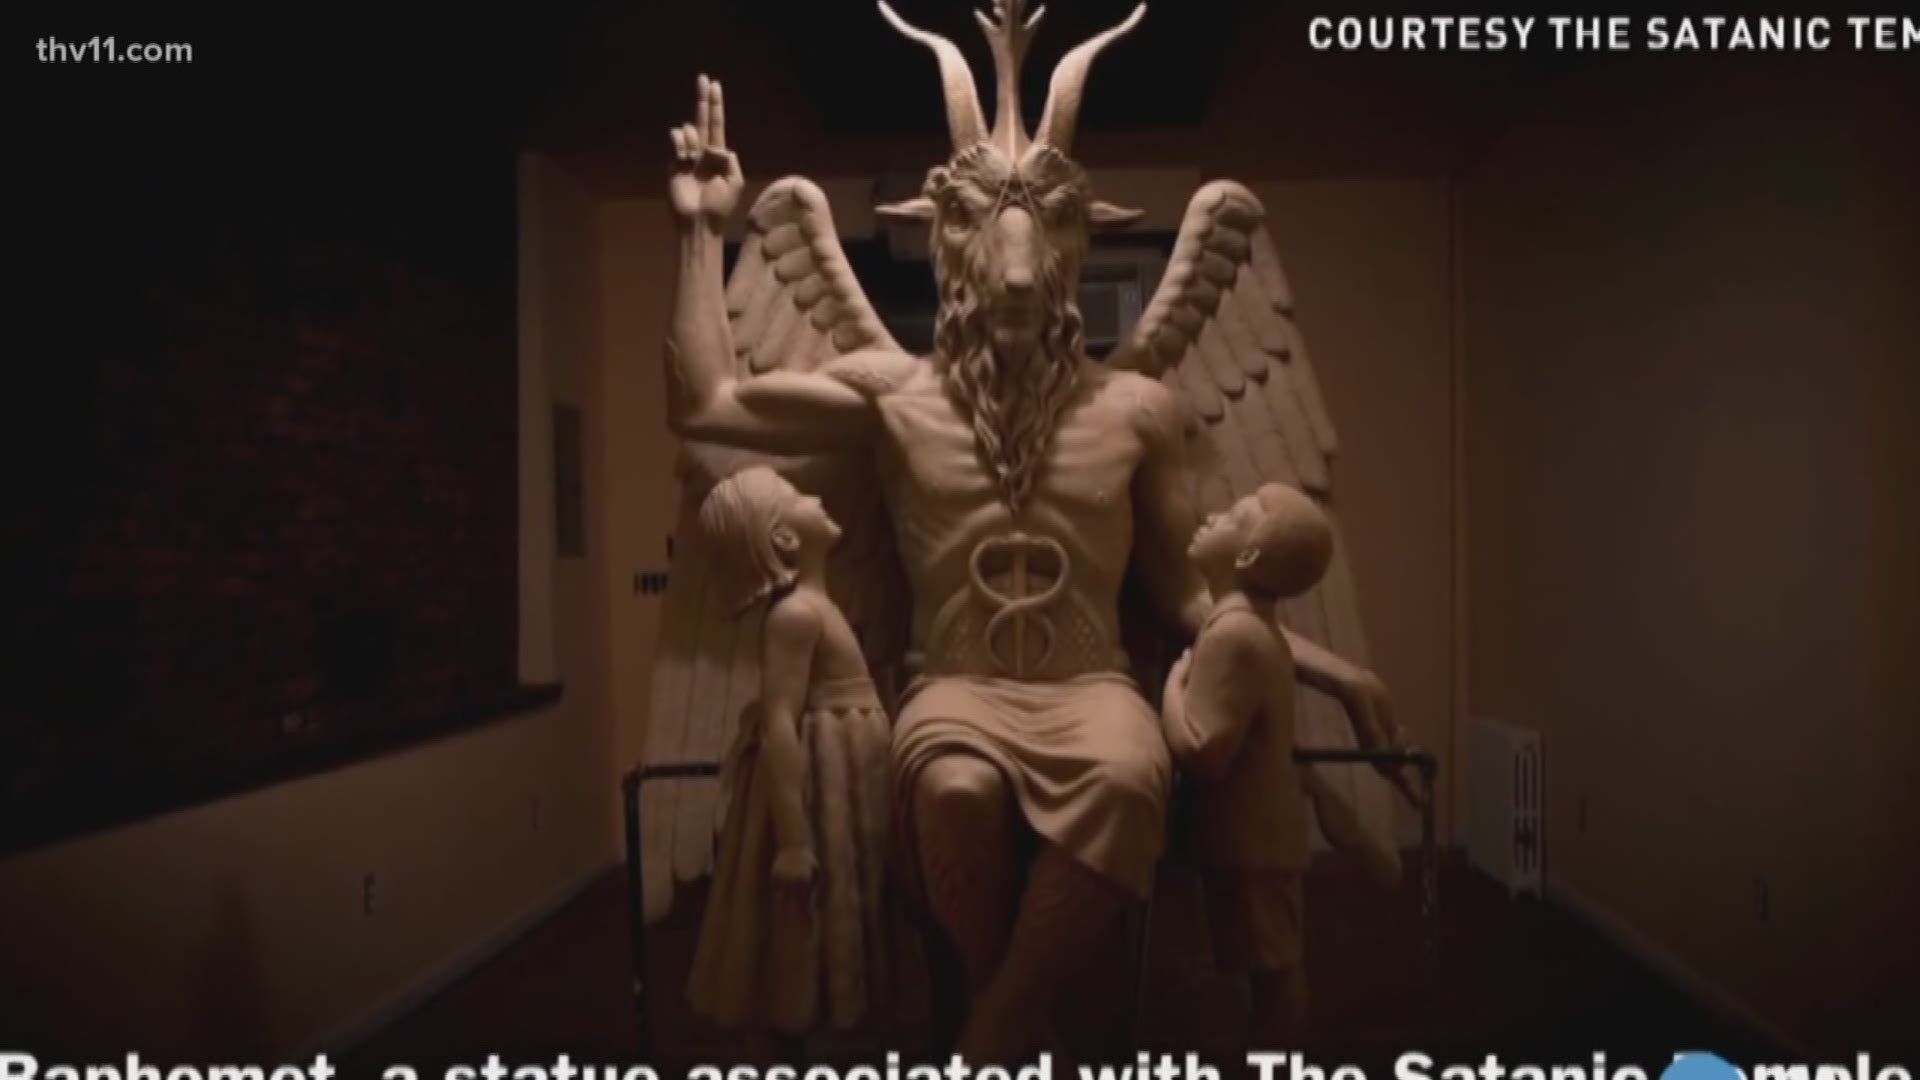 A federal judge is allowing the Satanic Temple to join a lawsuit challenging a Ten Commandments monument installed near Arkansas' state Capitol.